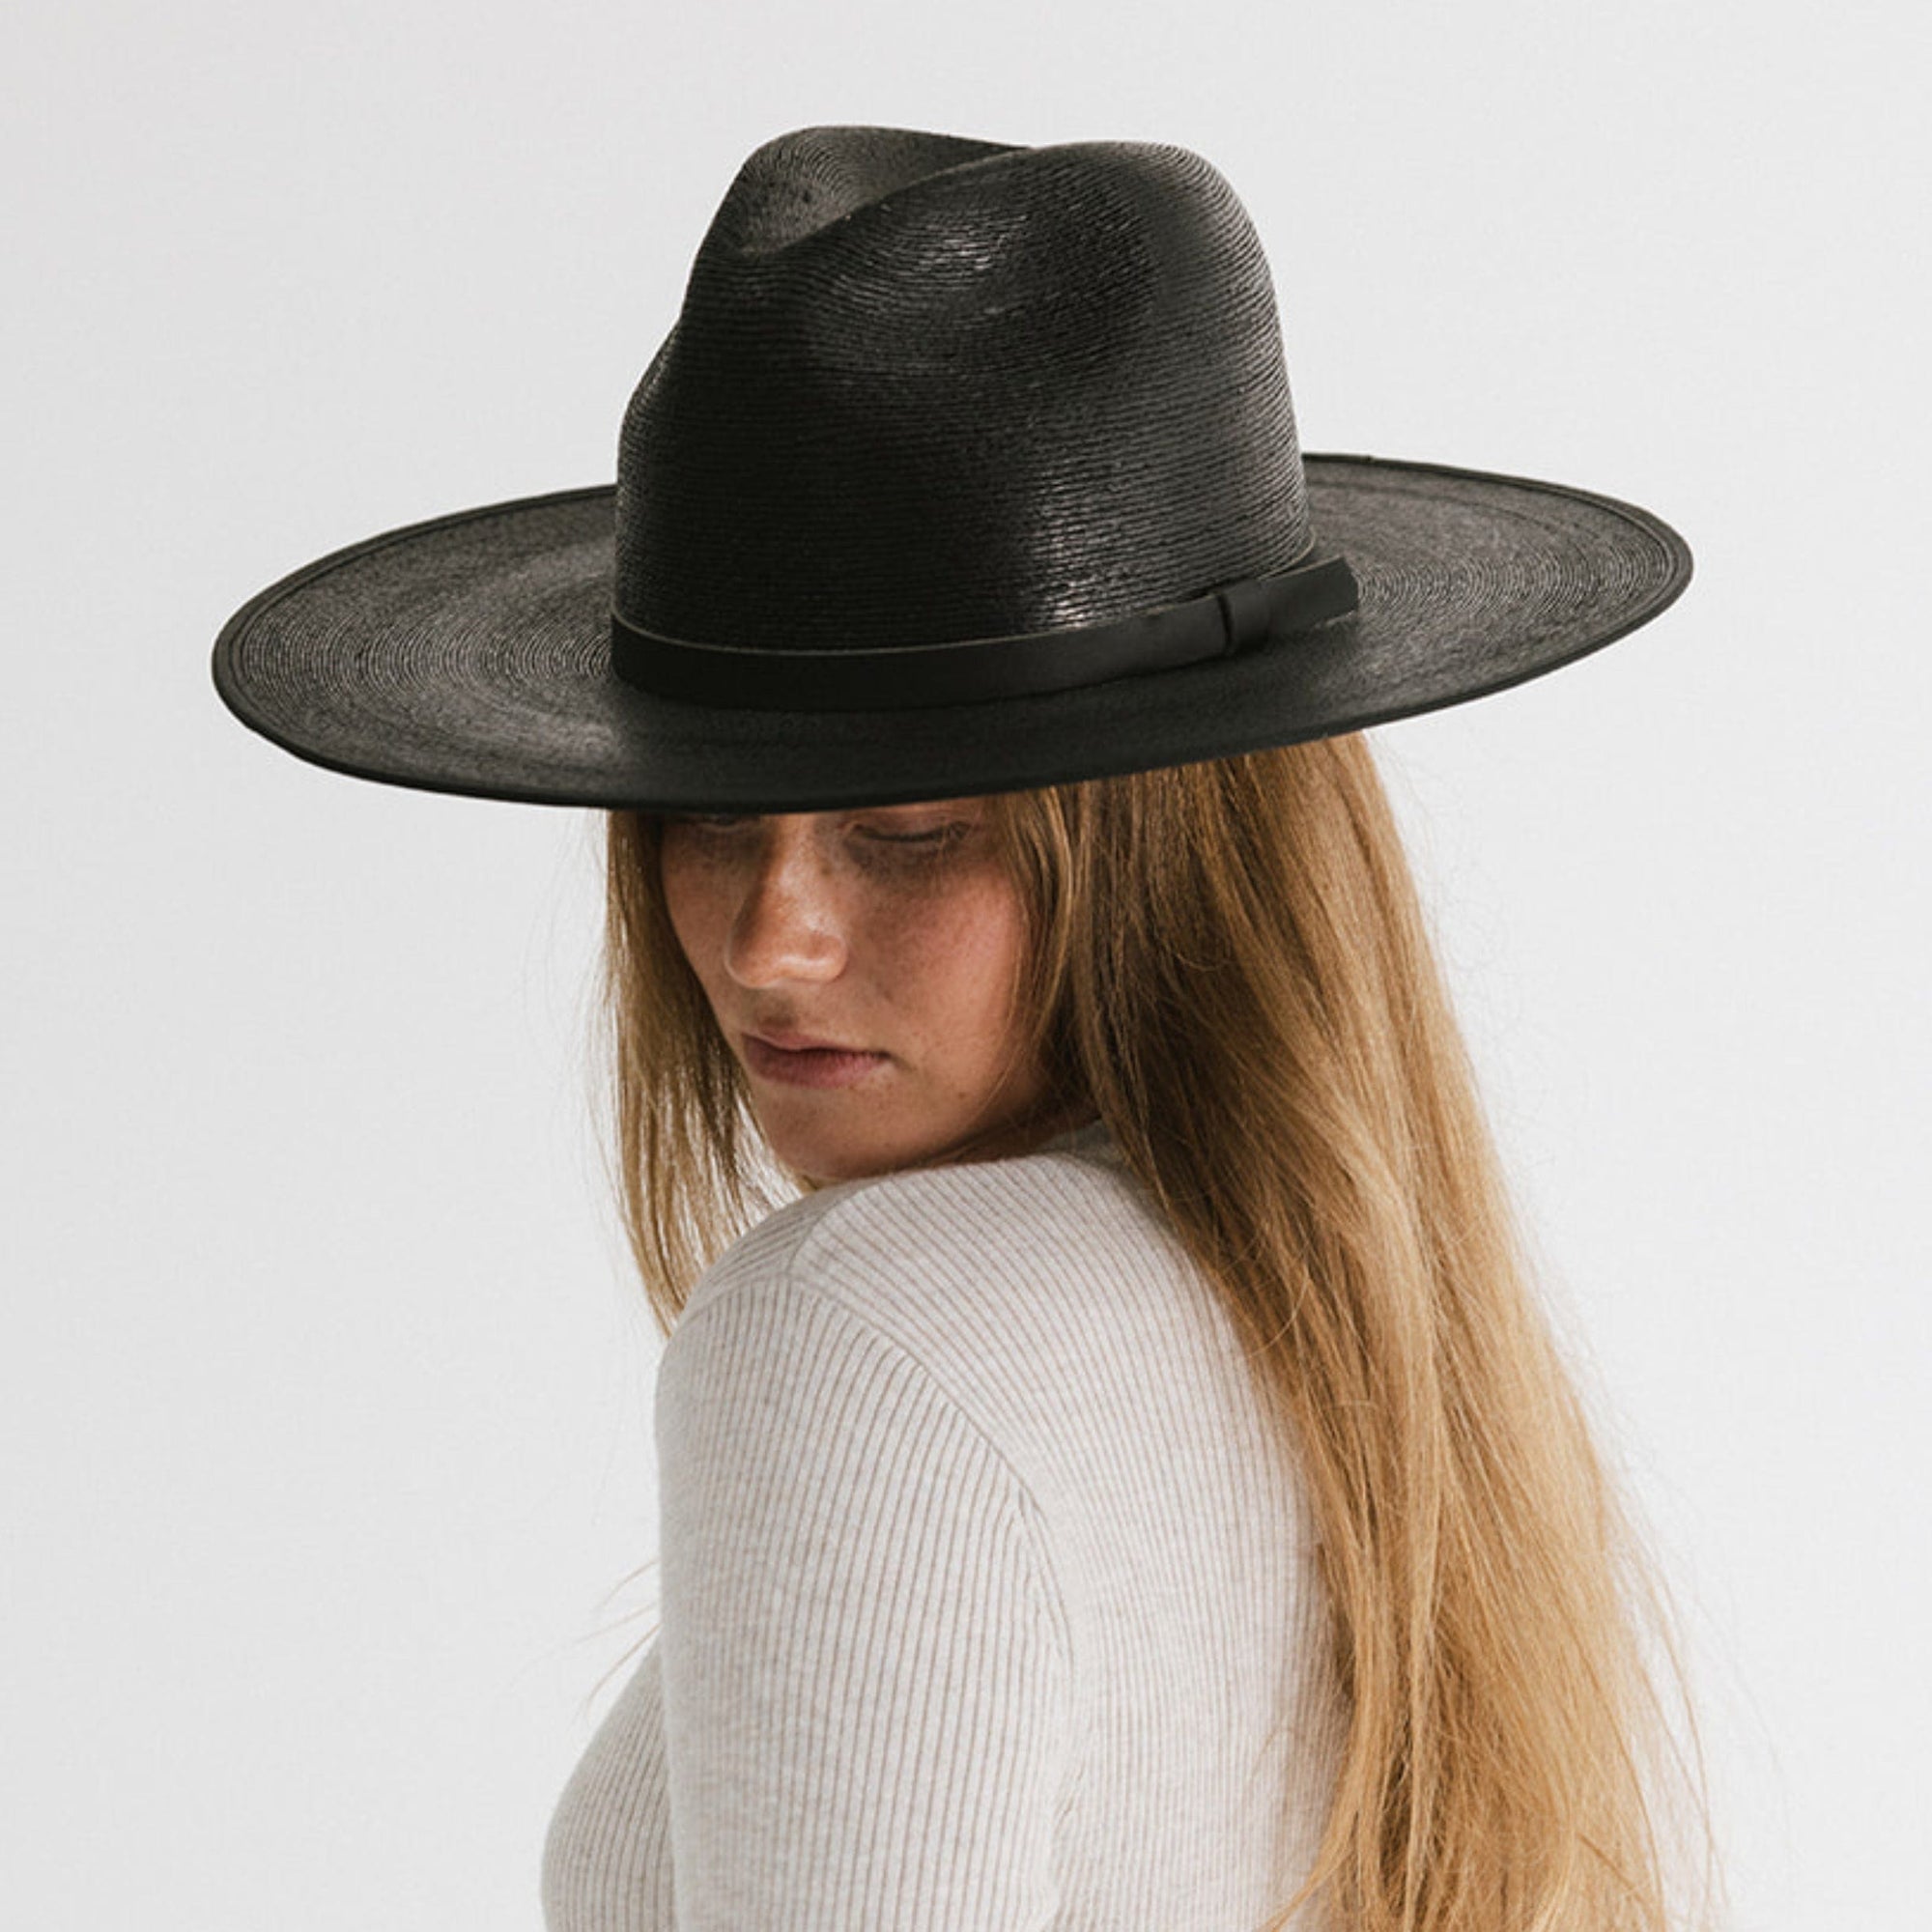 Large-brimmed hat for men and women - Large brims, larger style